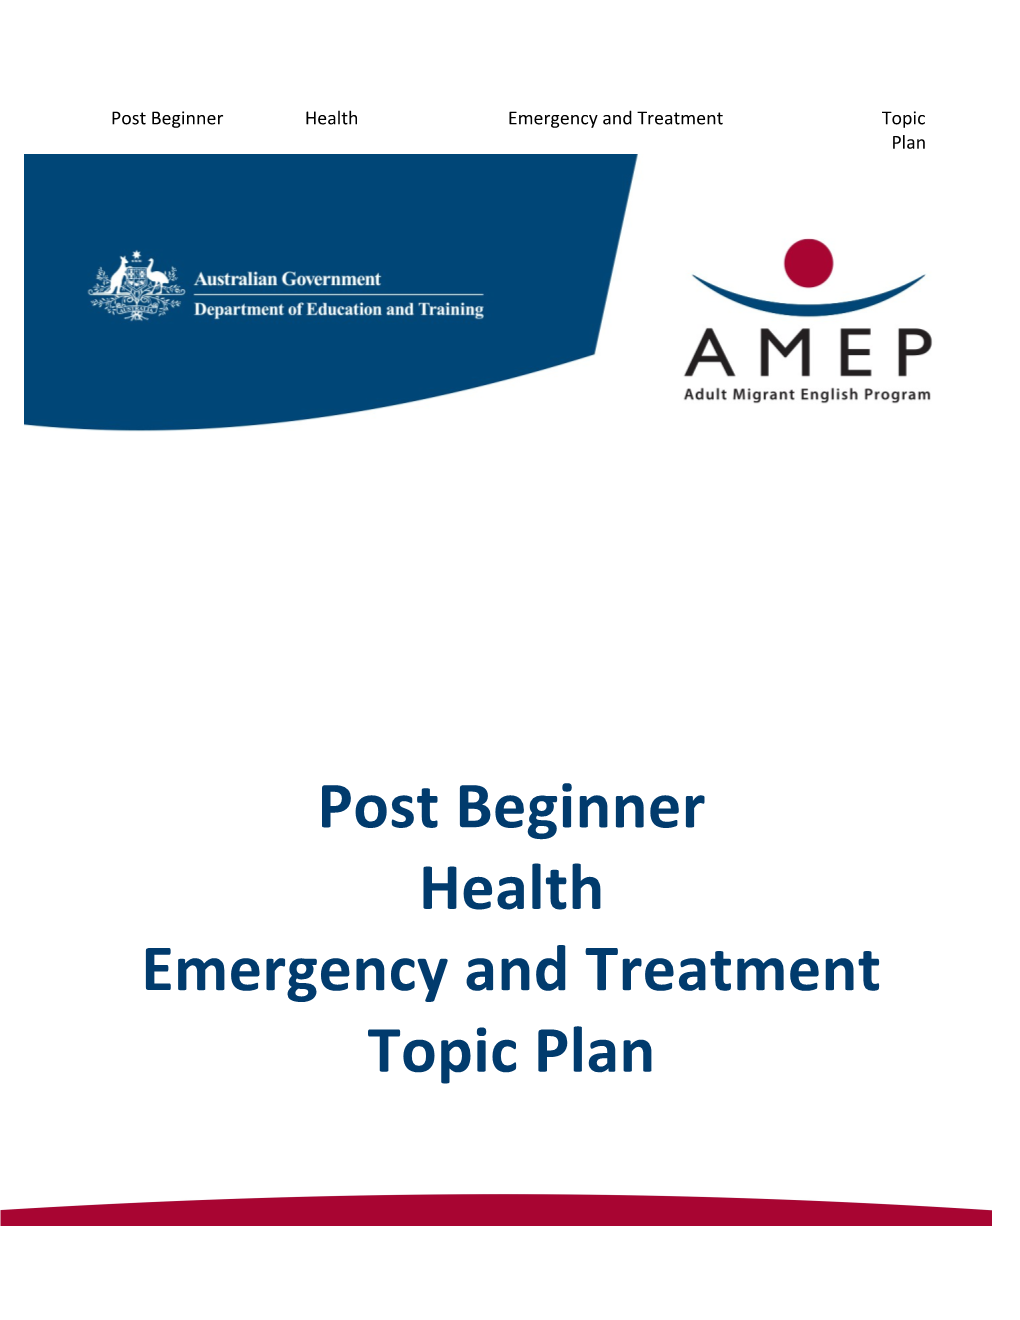 Post Beginner Health Emergency and Treatment Topic Plan